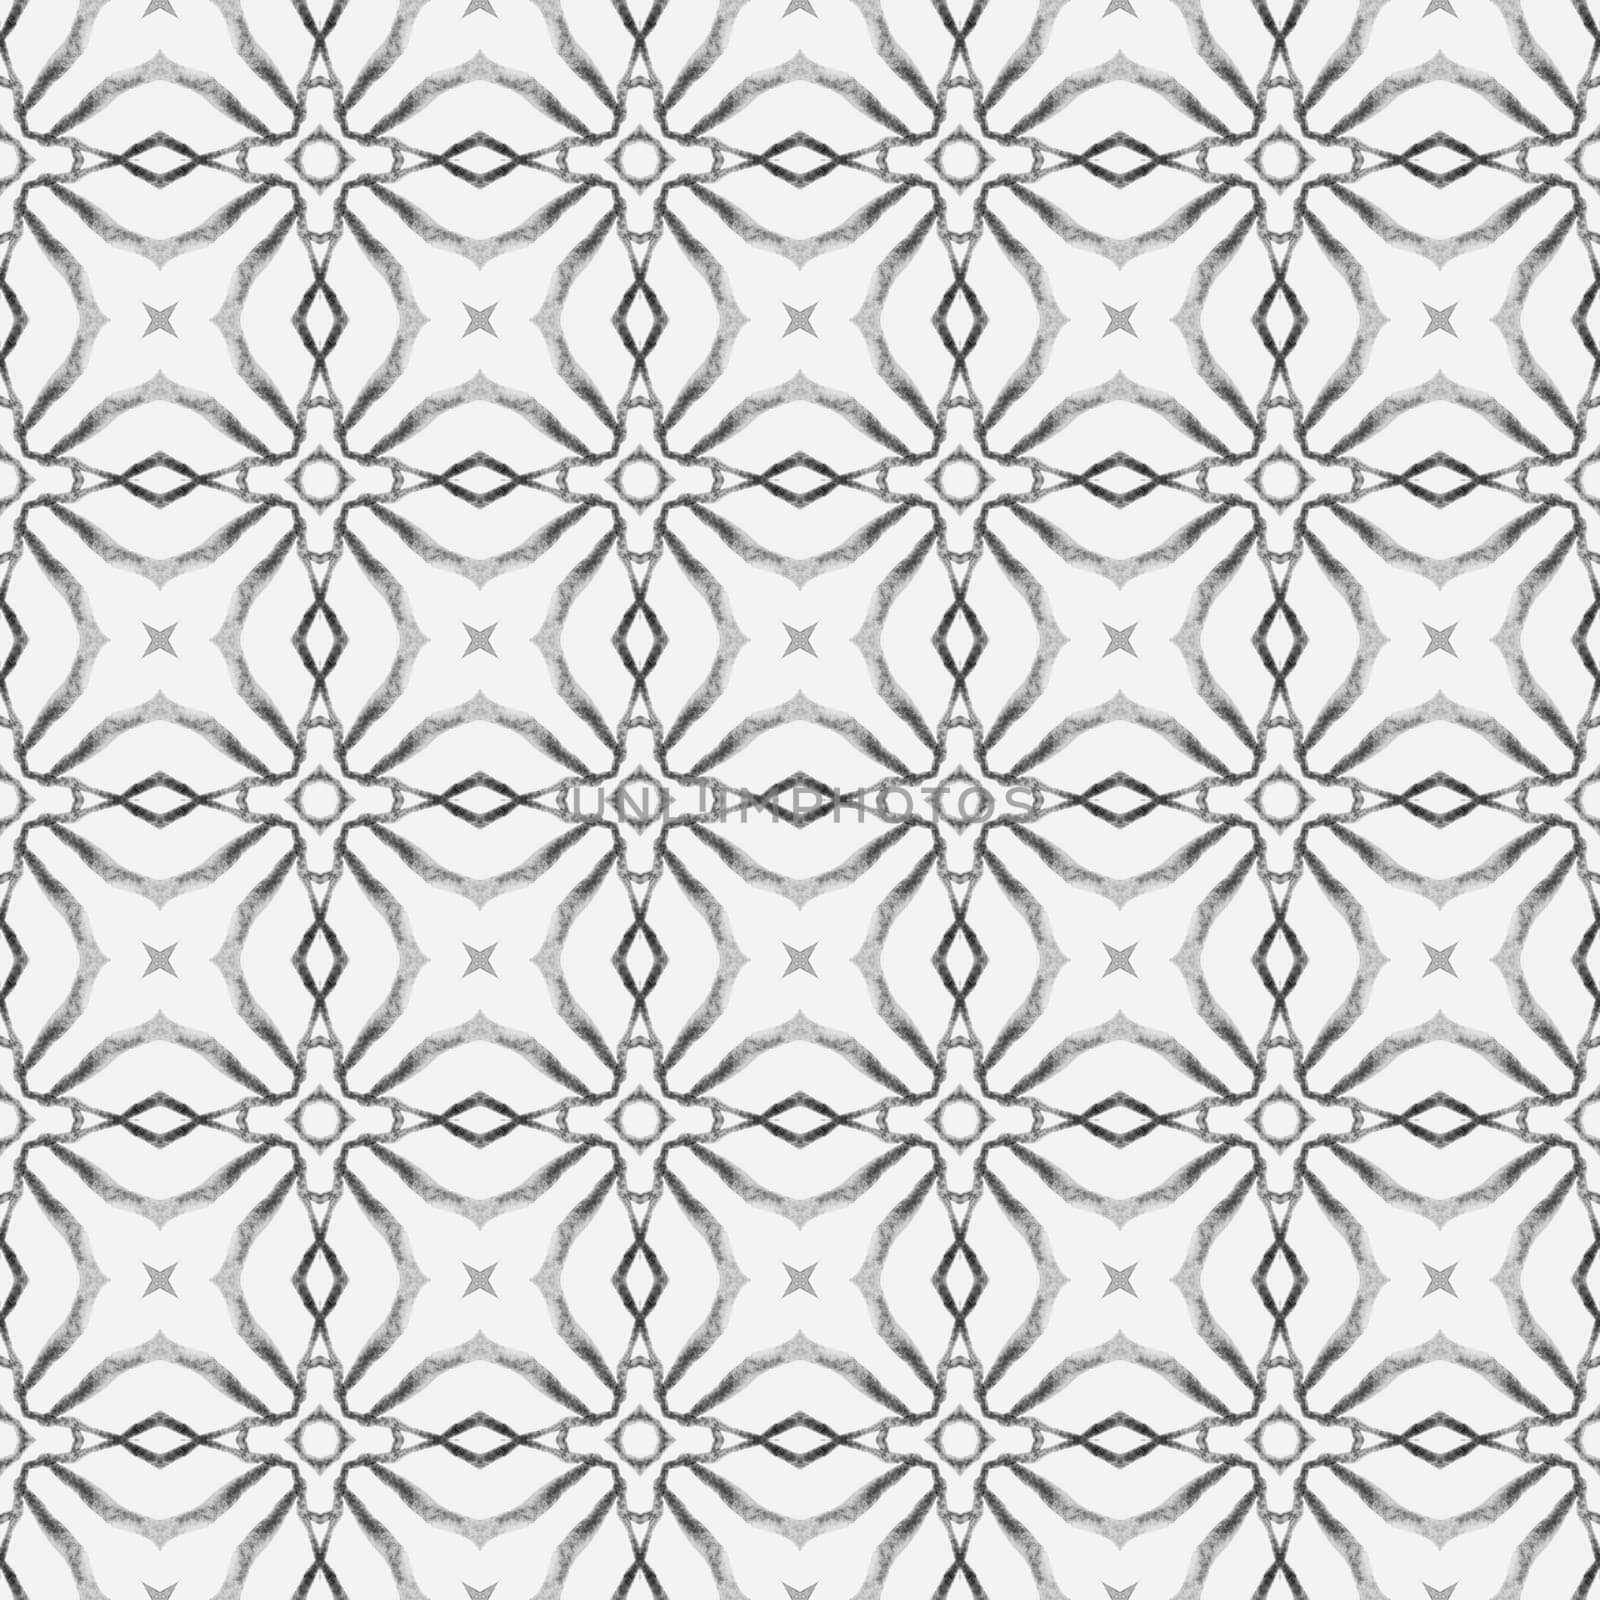 Mosaic seamless pattern. Black and white vibrant by beginagain